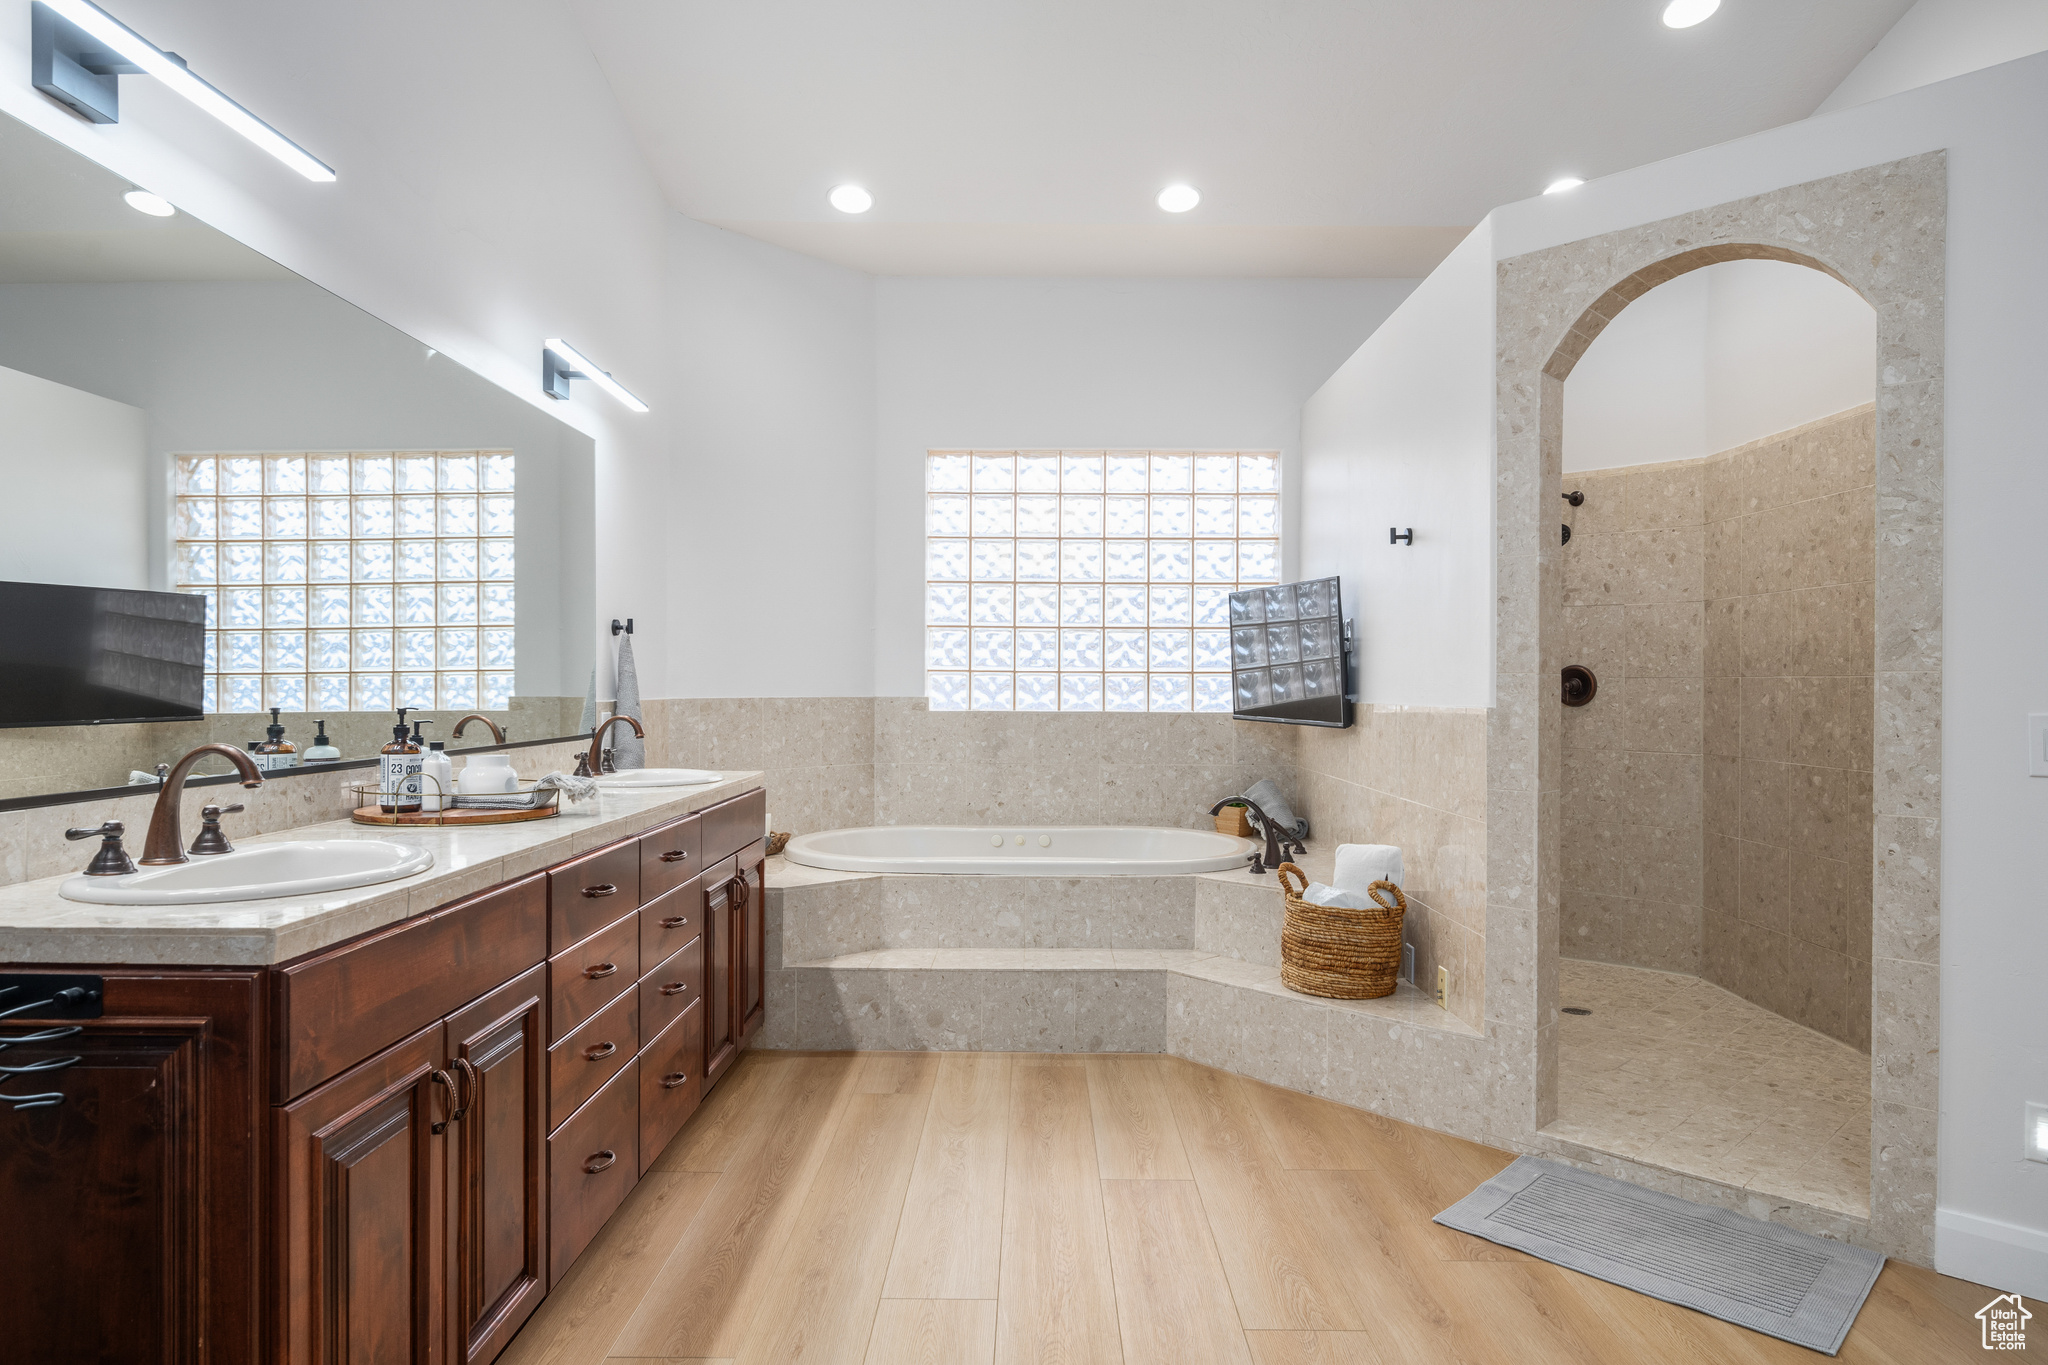 Bathroom with a wealth of natural light, dual vanity, separate shower and tub, and hardwood / wood-style floors